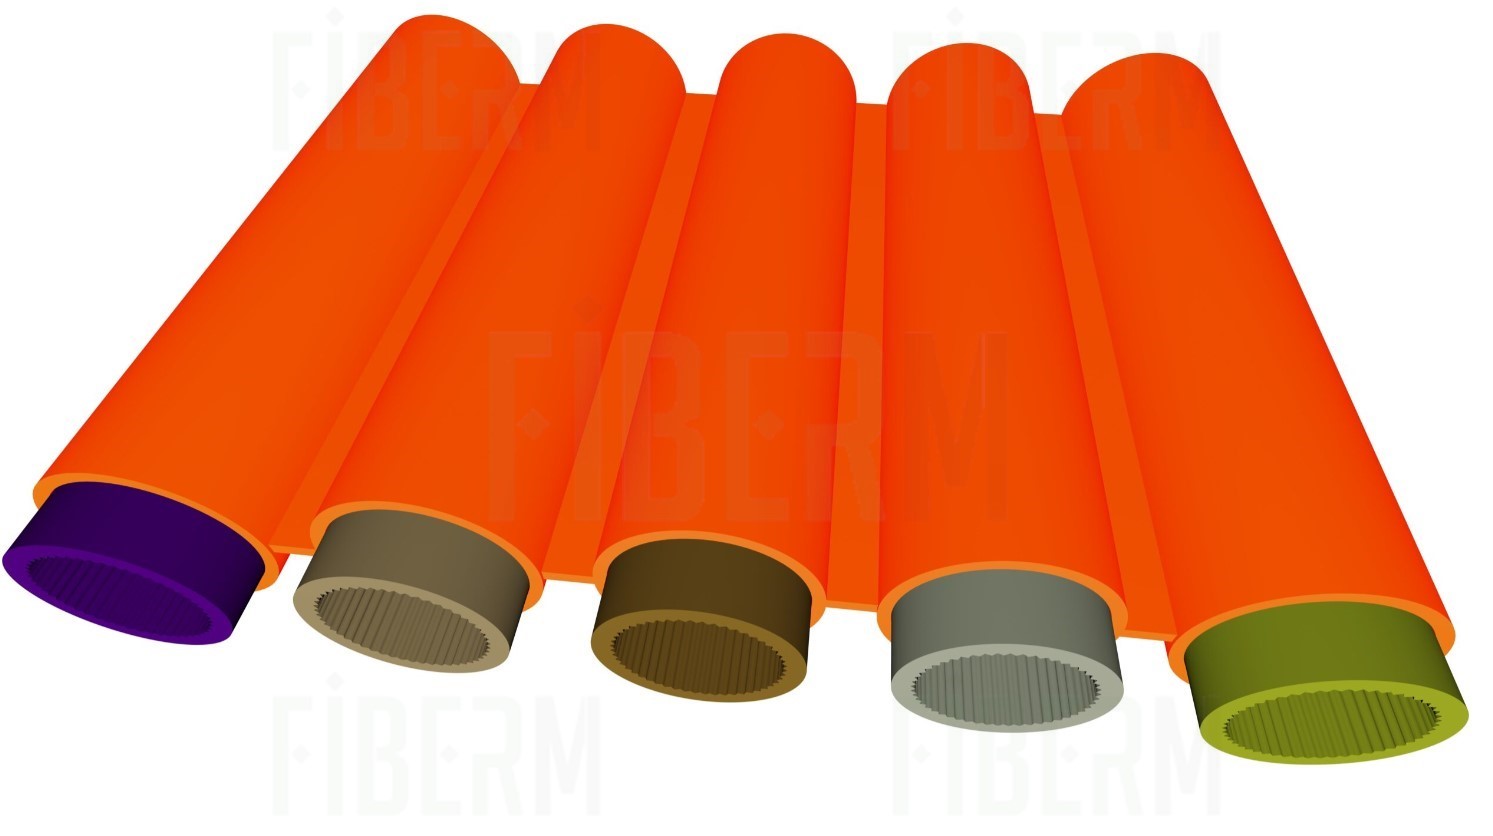 Flat Bundle / Package of Thick-Walled HDPE Microducts 7 x fi 8/4mm for direct burial installation